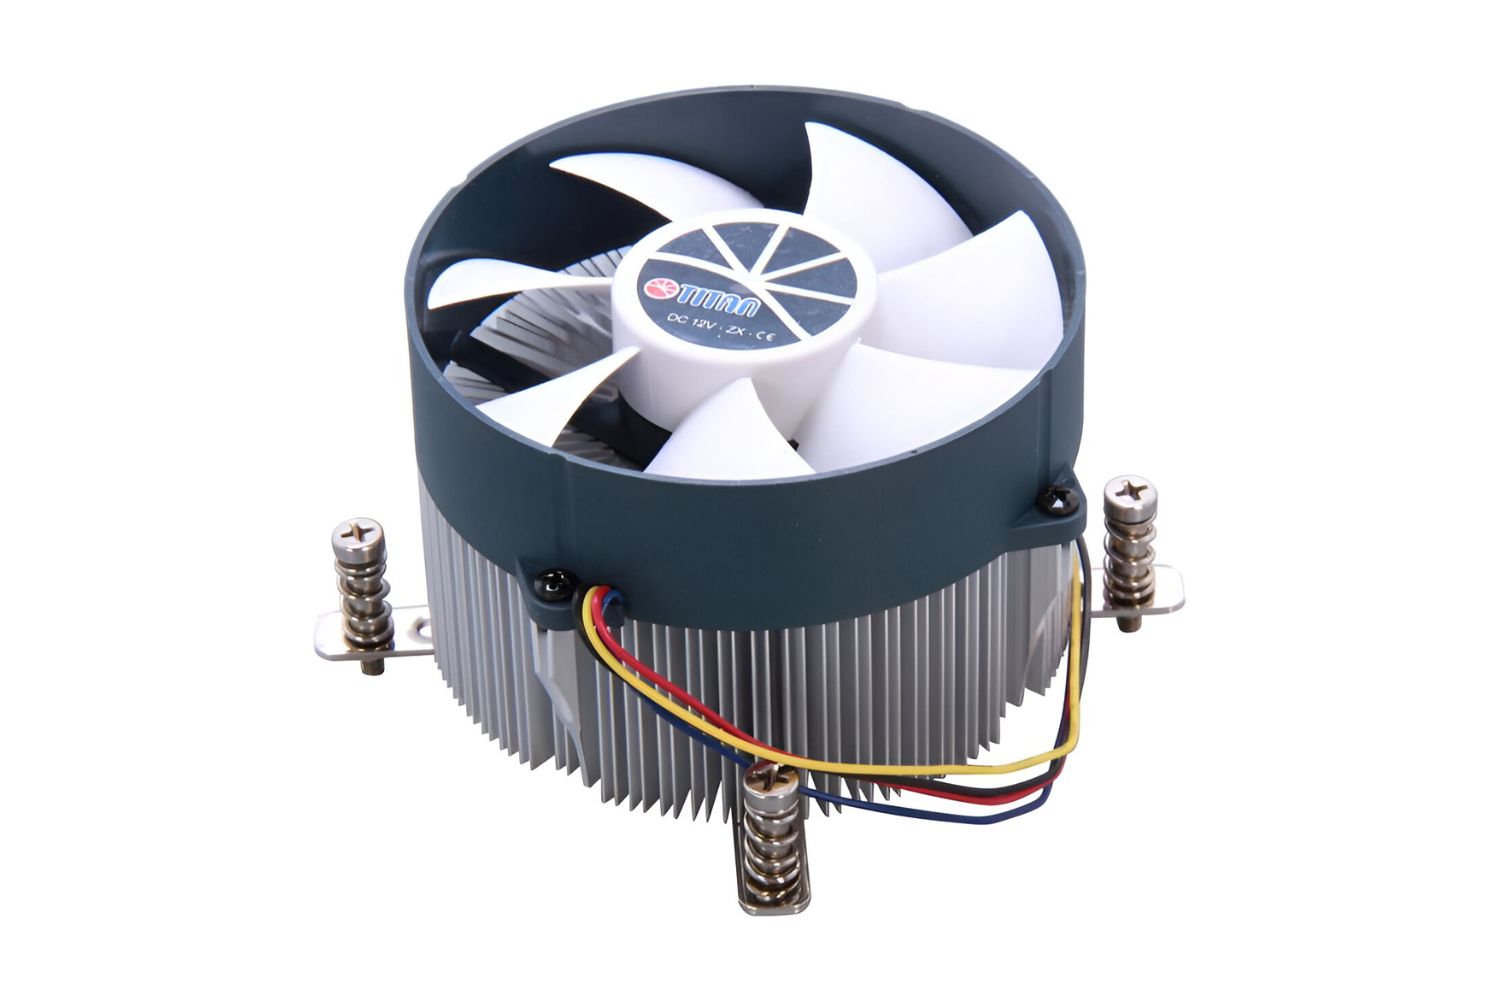 How Big Does Case Need To Be To Fit Titan TTC-NA43TZ/CU35 95mm Z-Axis CPU Cooler